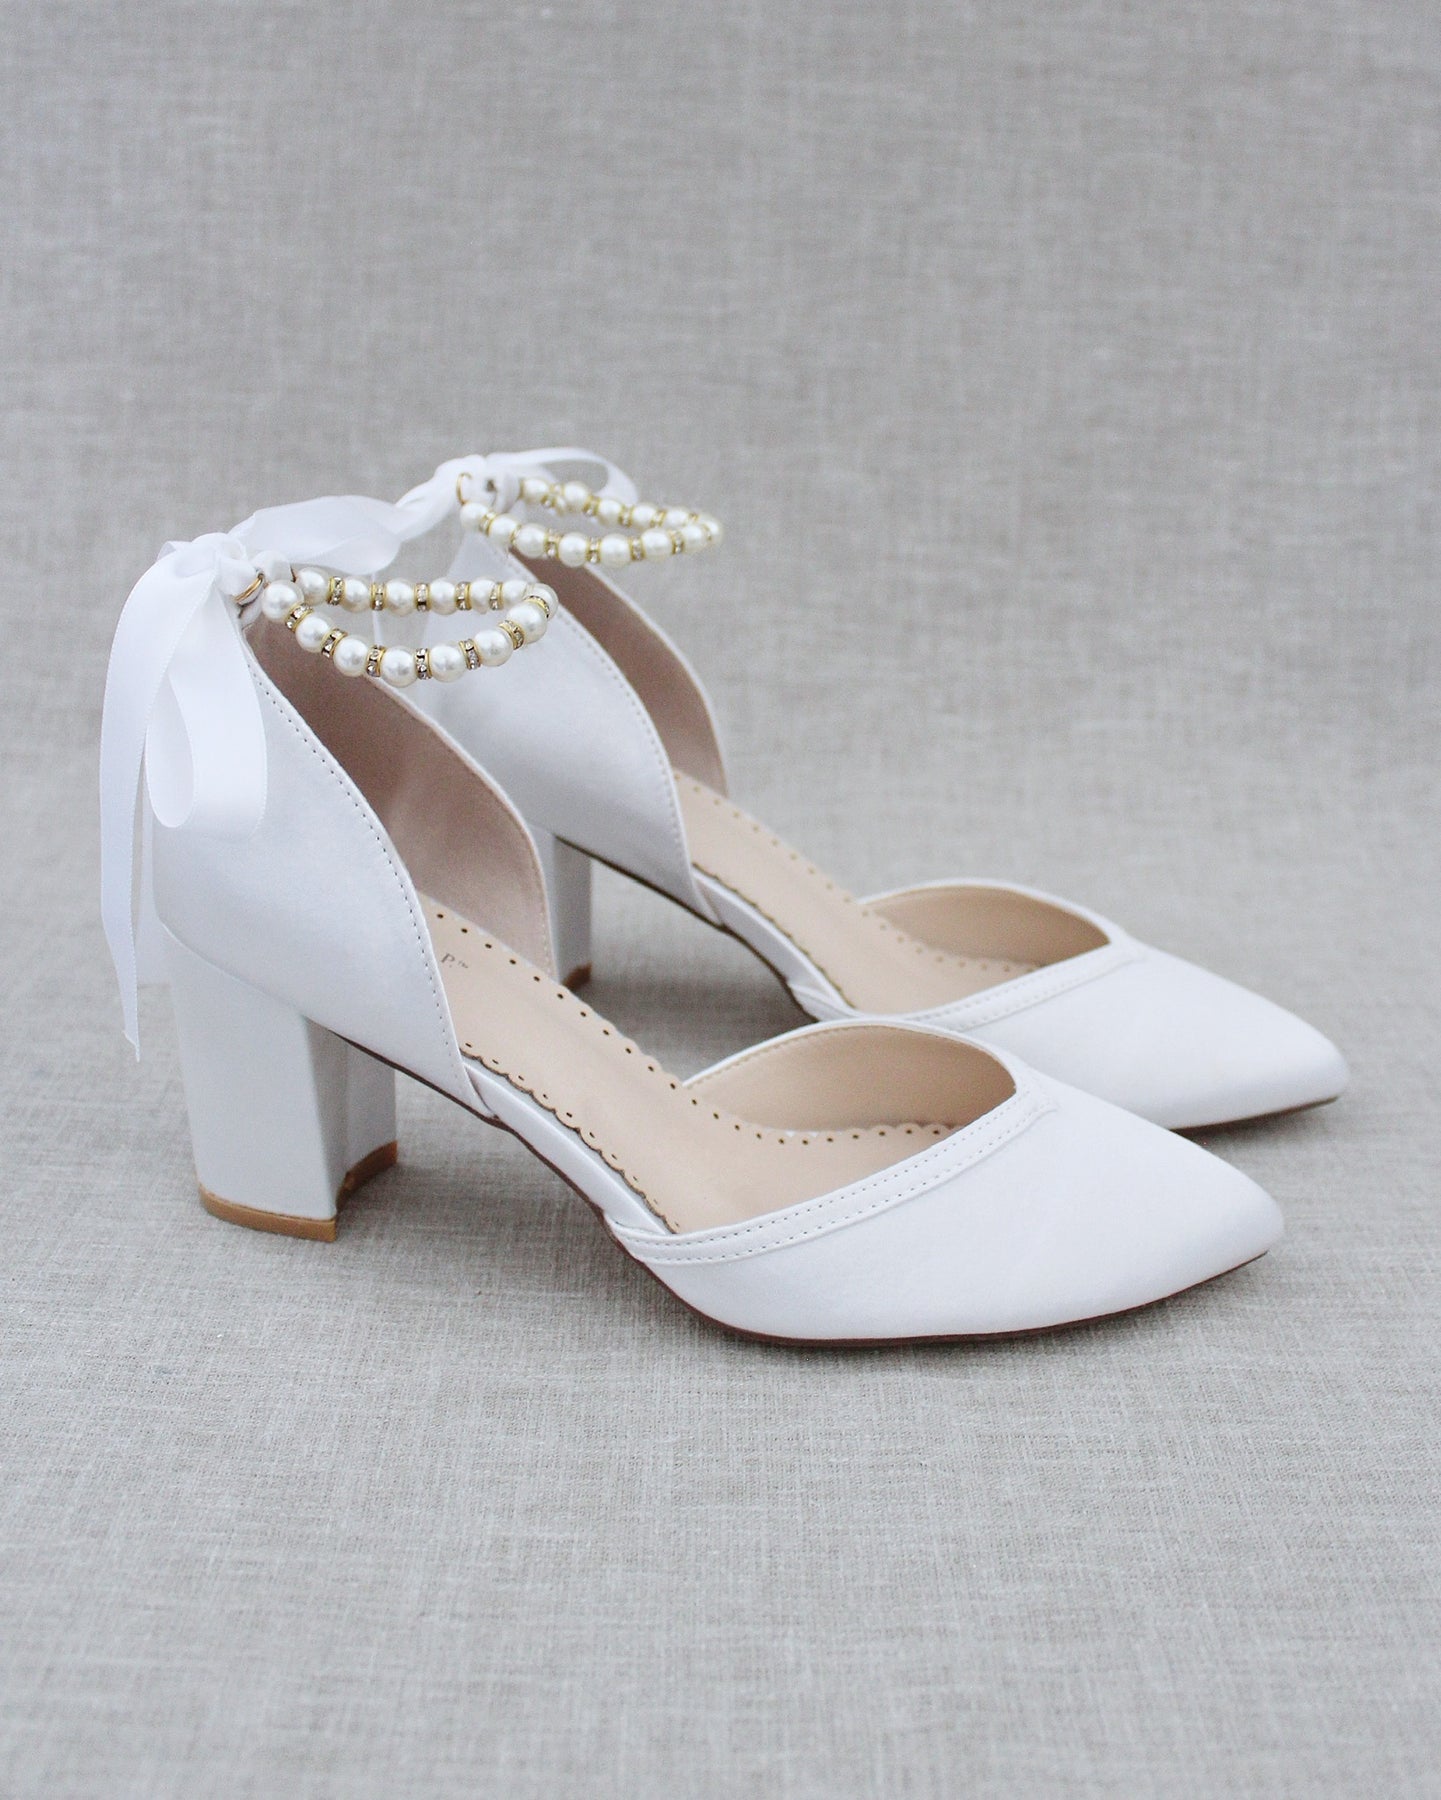 The 15 Best White Wedding Shoes for Your Bridal Style